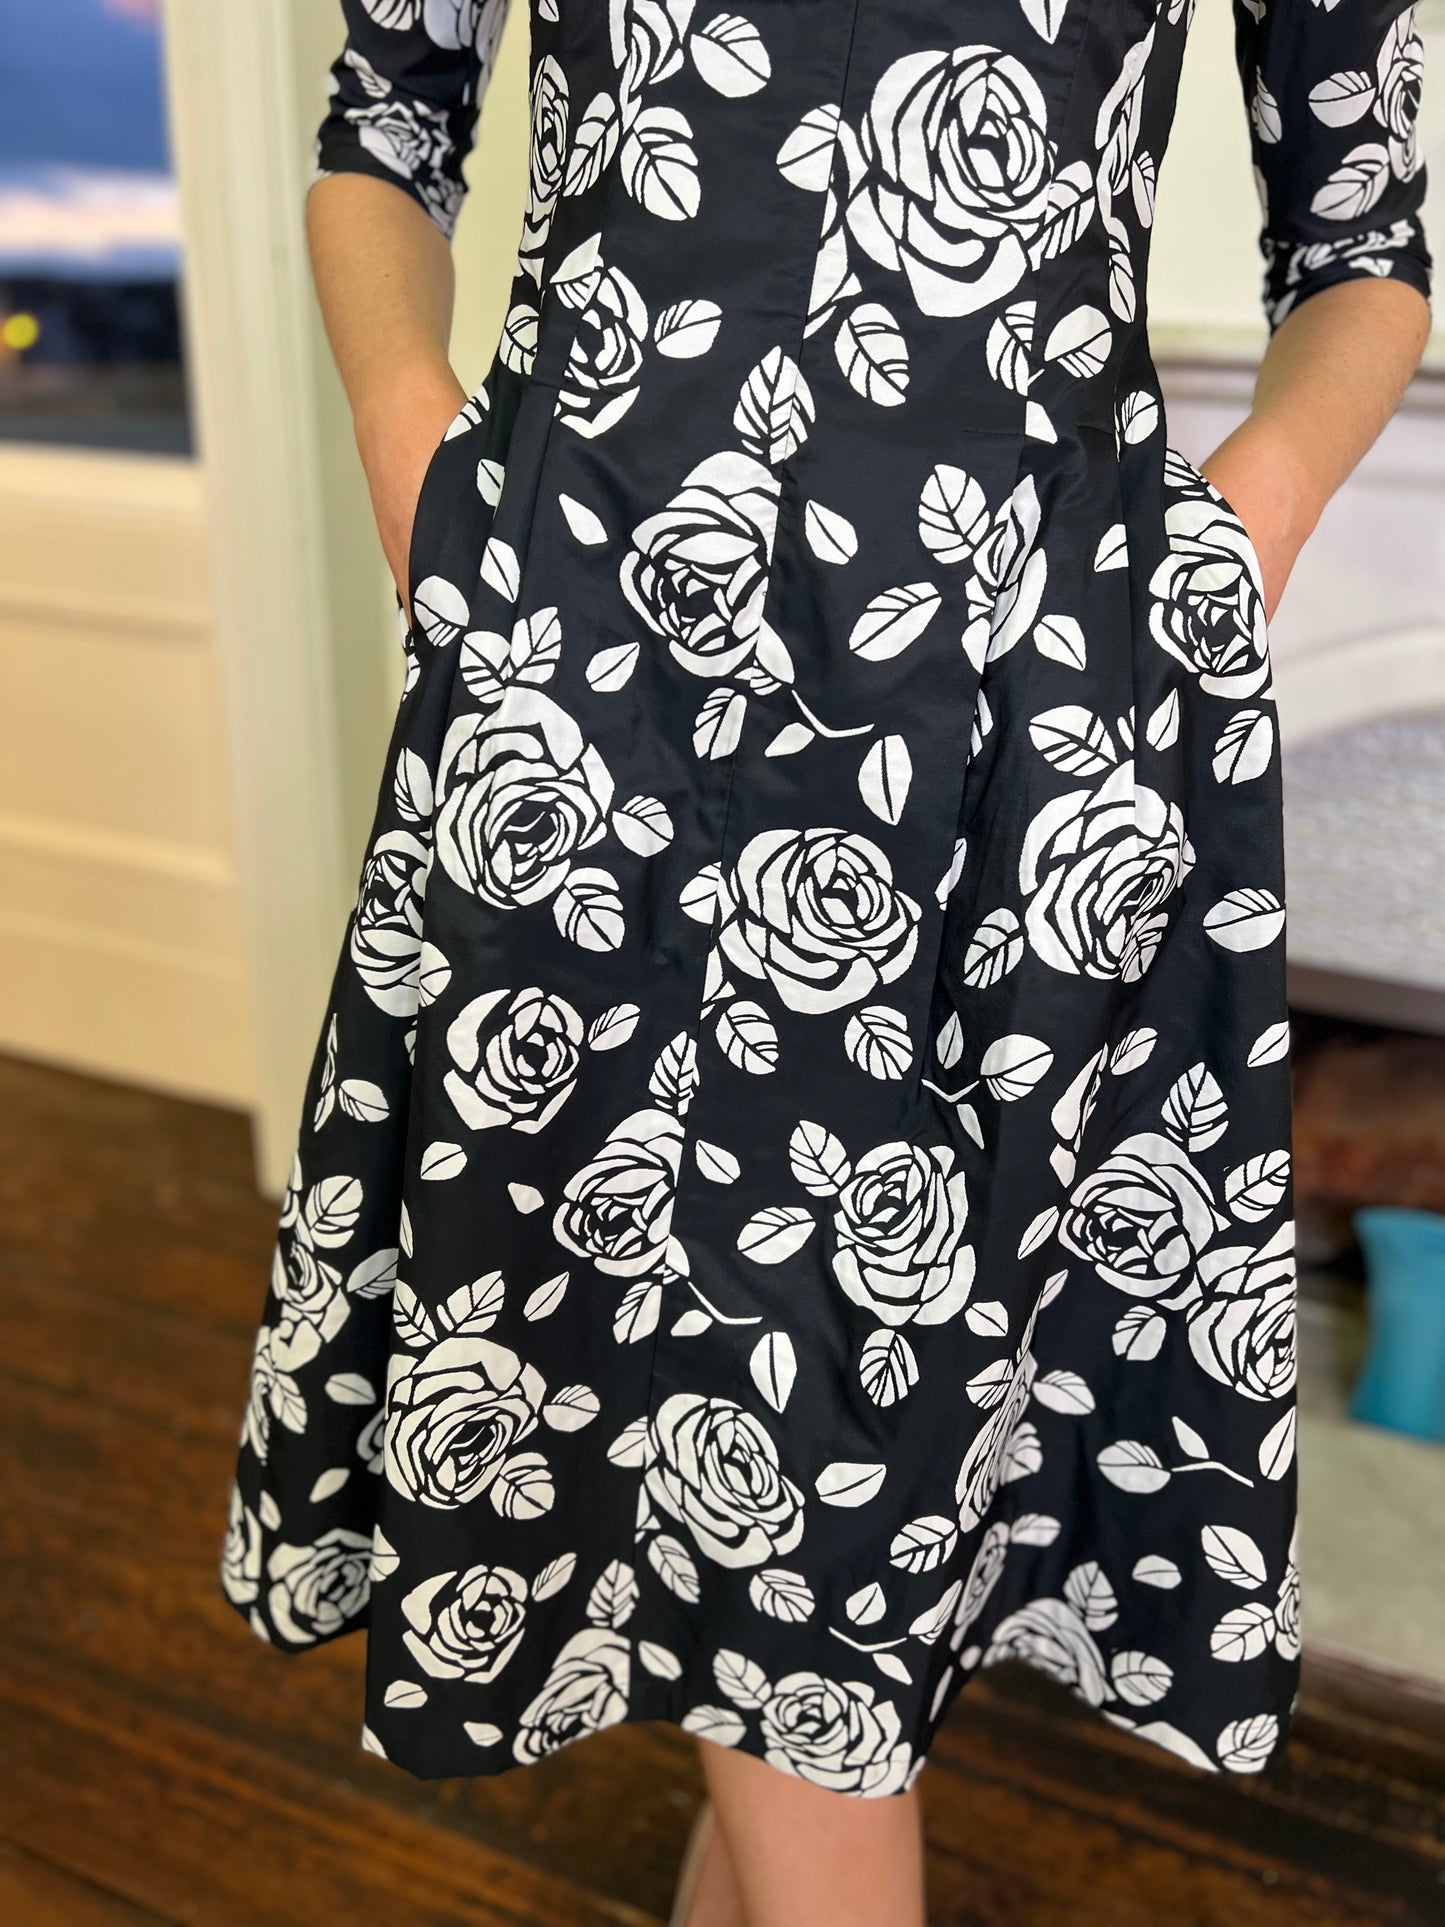 Alicia Black and White Brocade Fit and Flare Dress